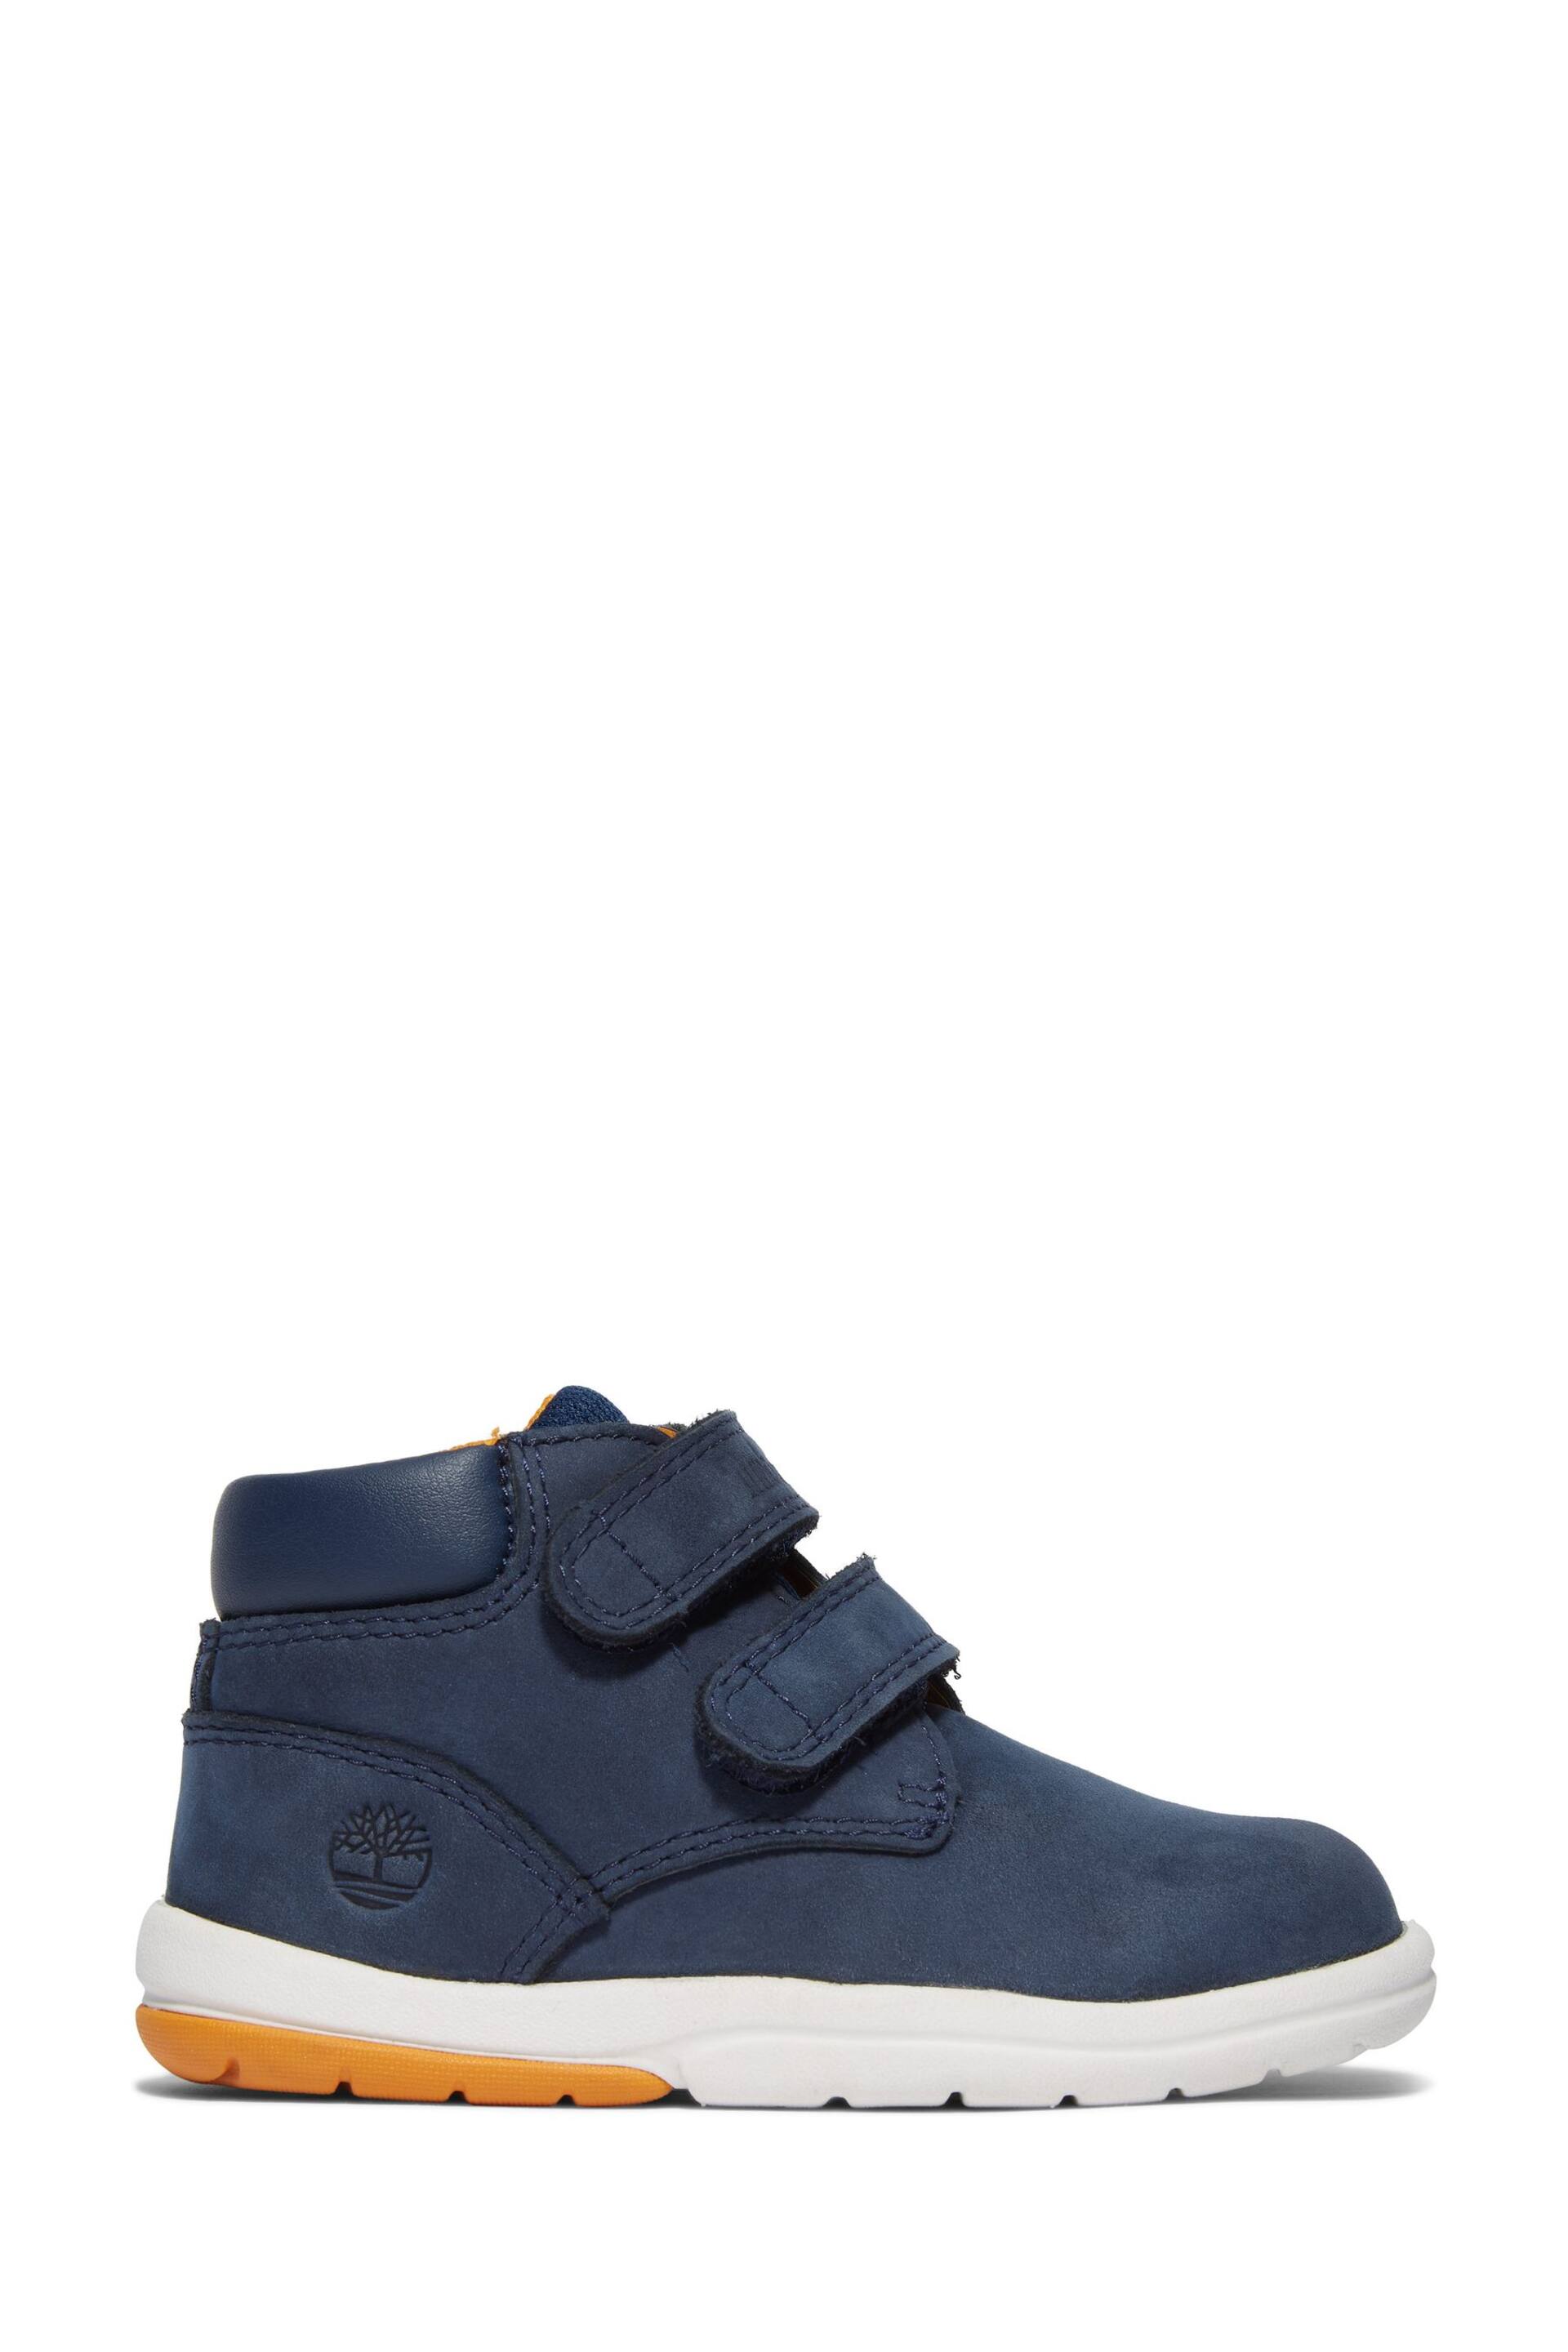 Timberland® Toddler Hook and Loop Tracks Nubuck Boots - Image 1 of 1